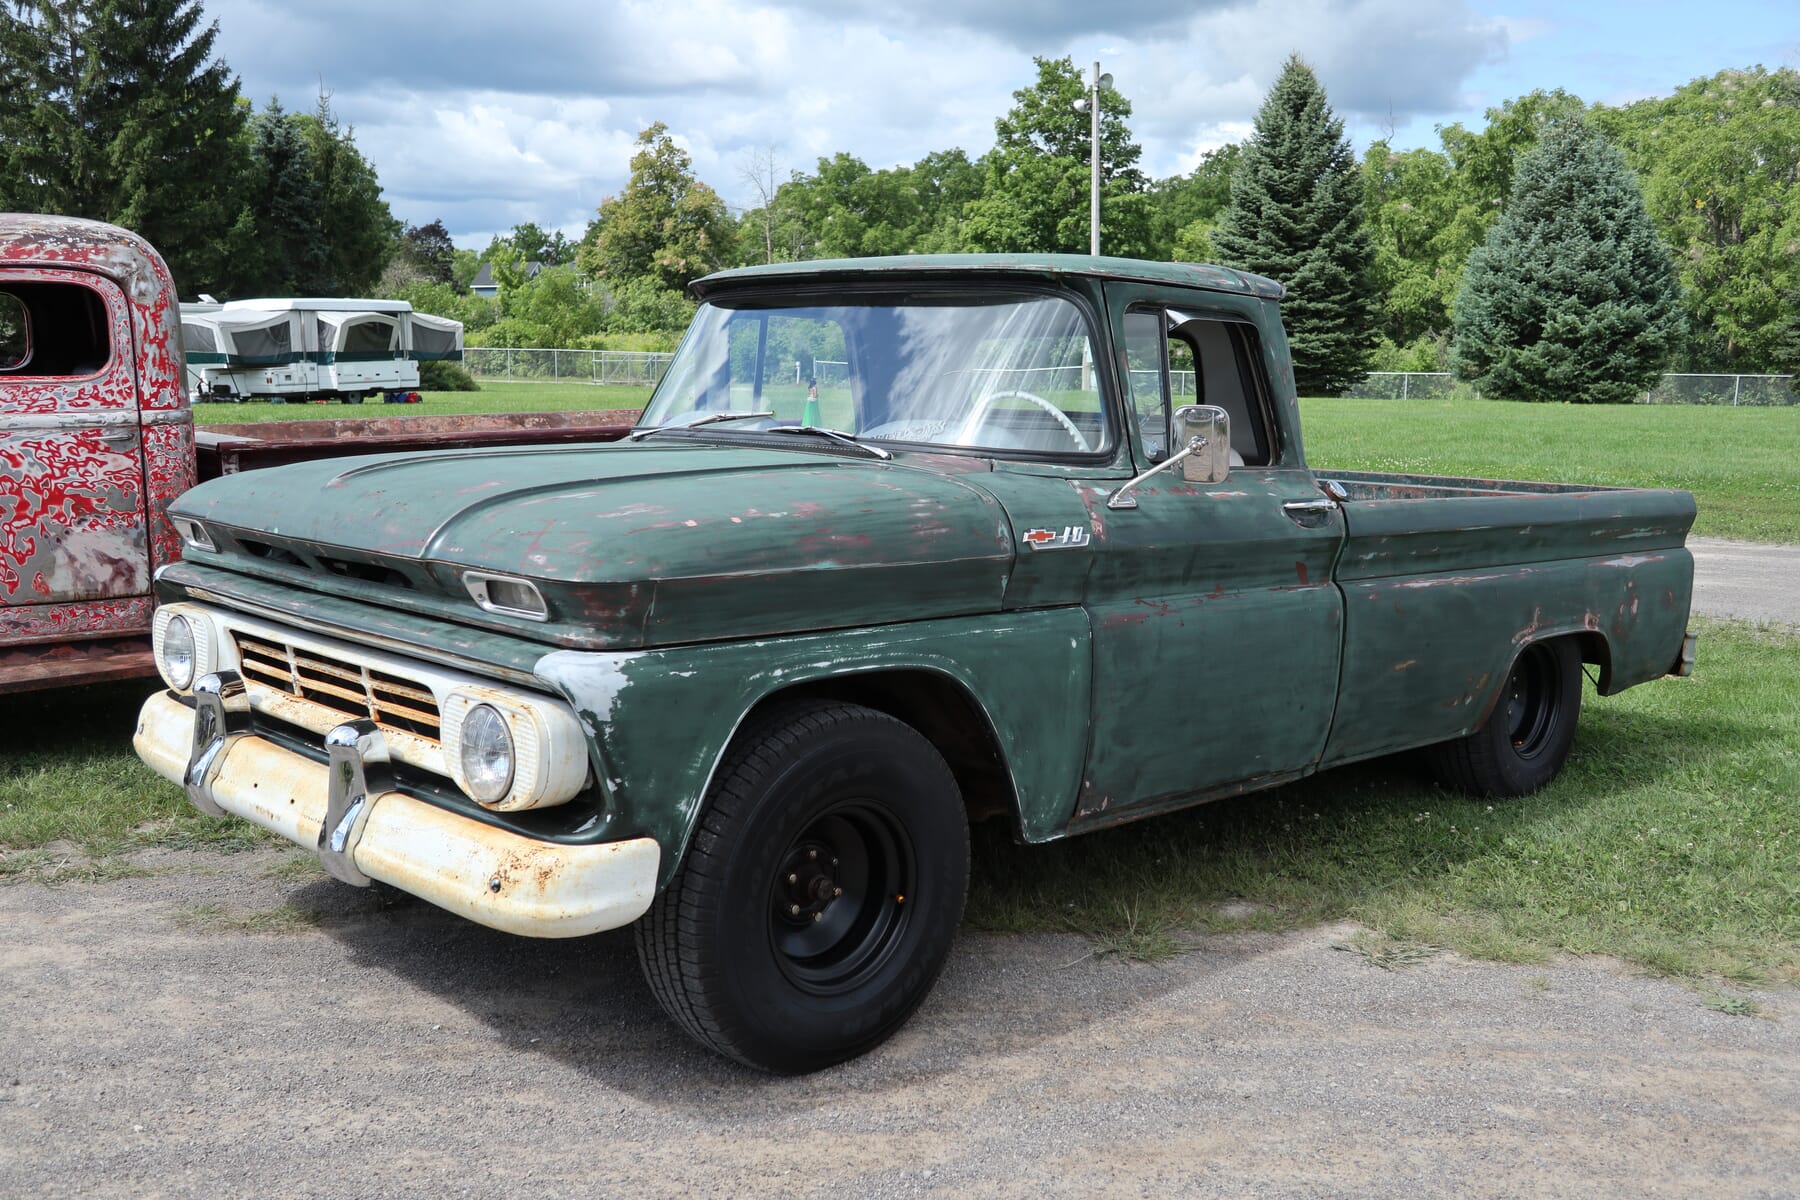 1962 Chevrolet C10, one of the more sought after trucks to restore lately